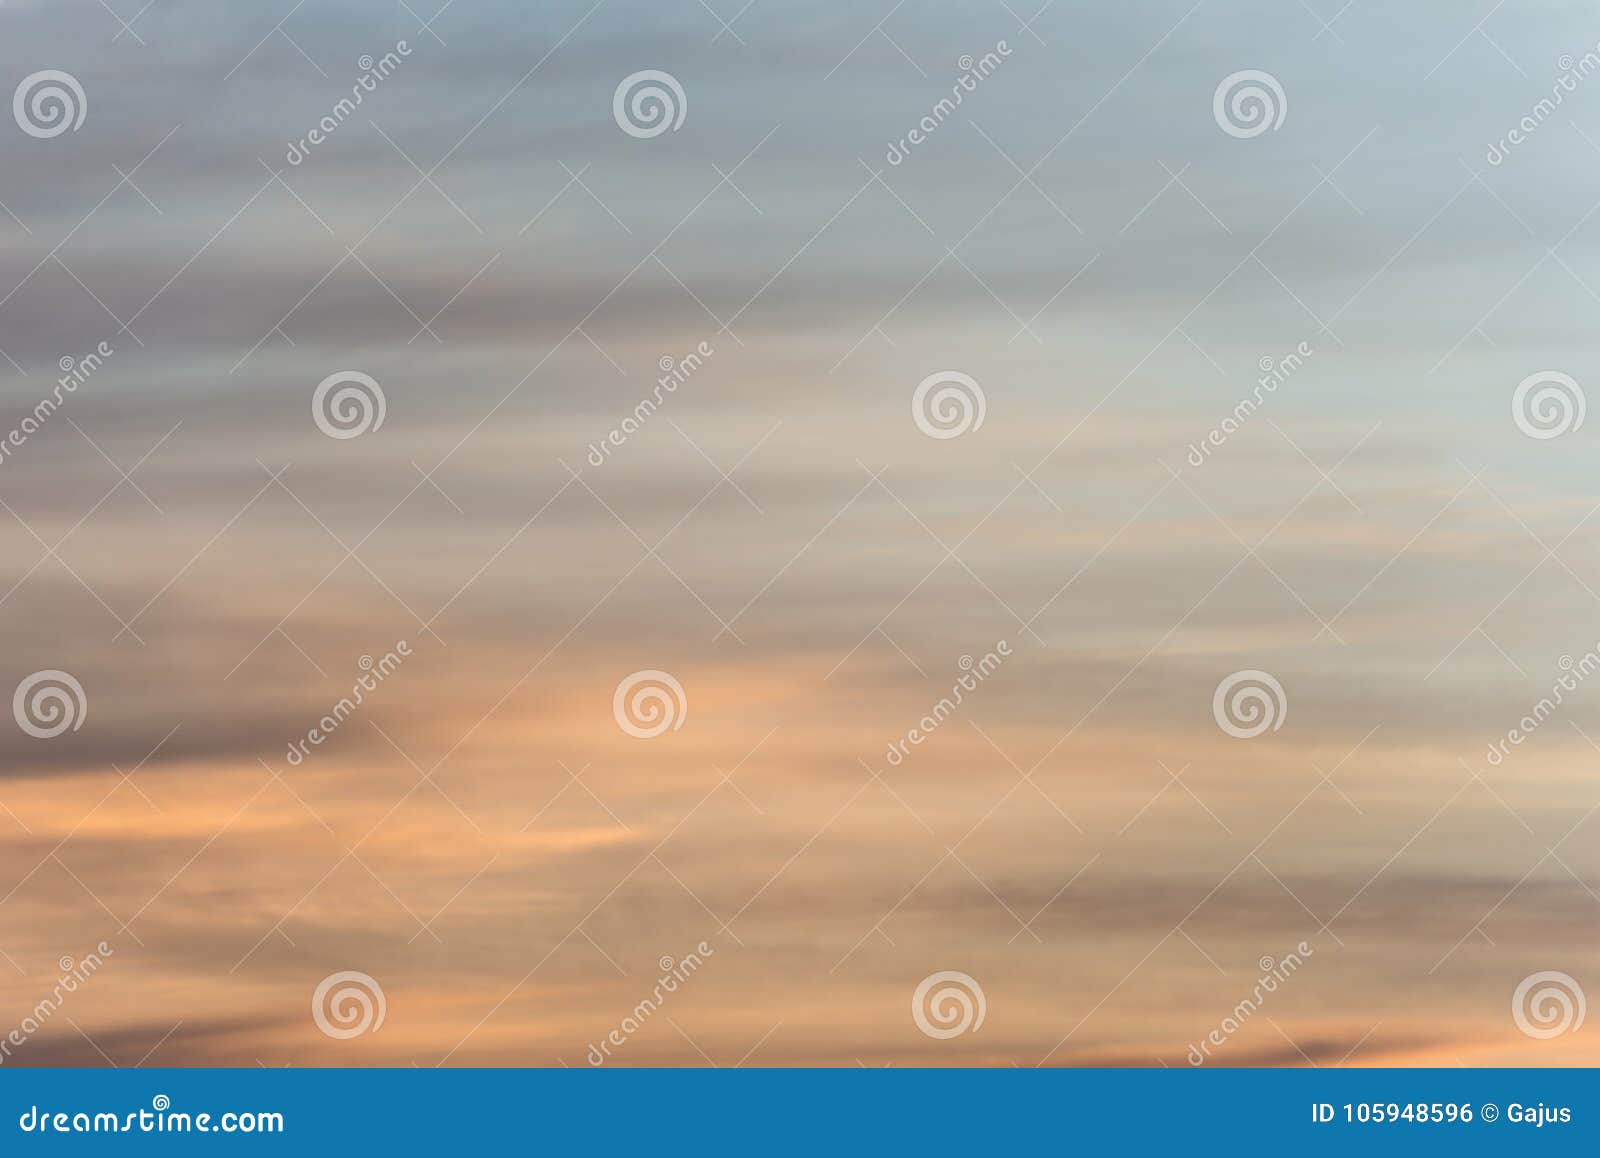 sunset sky background with a golden orange glow on a hazy clouds